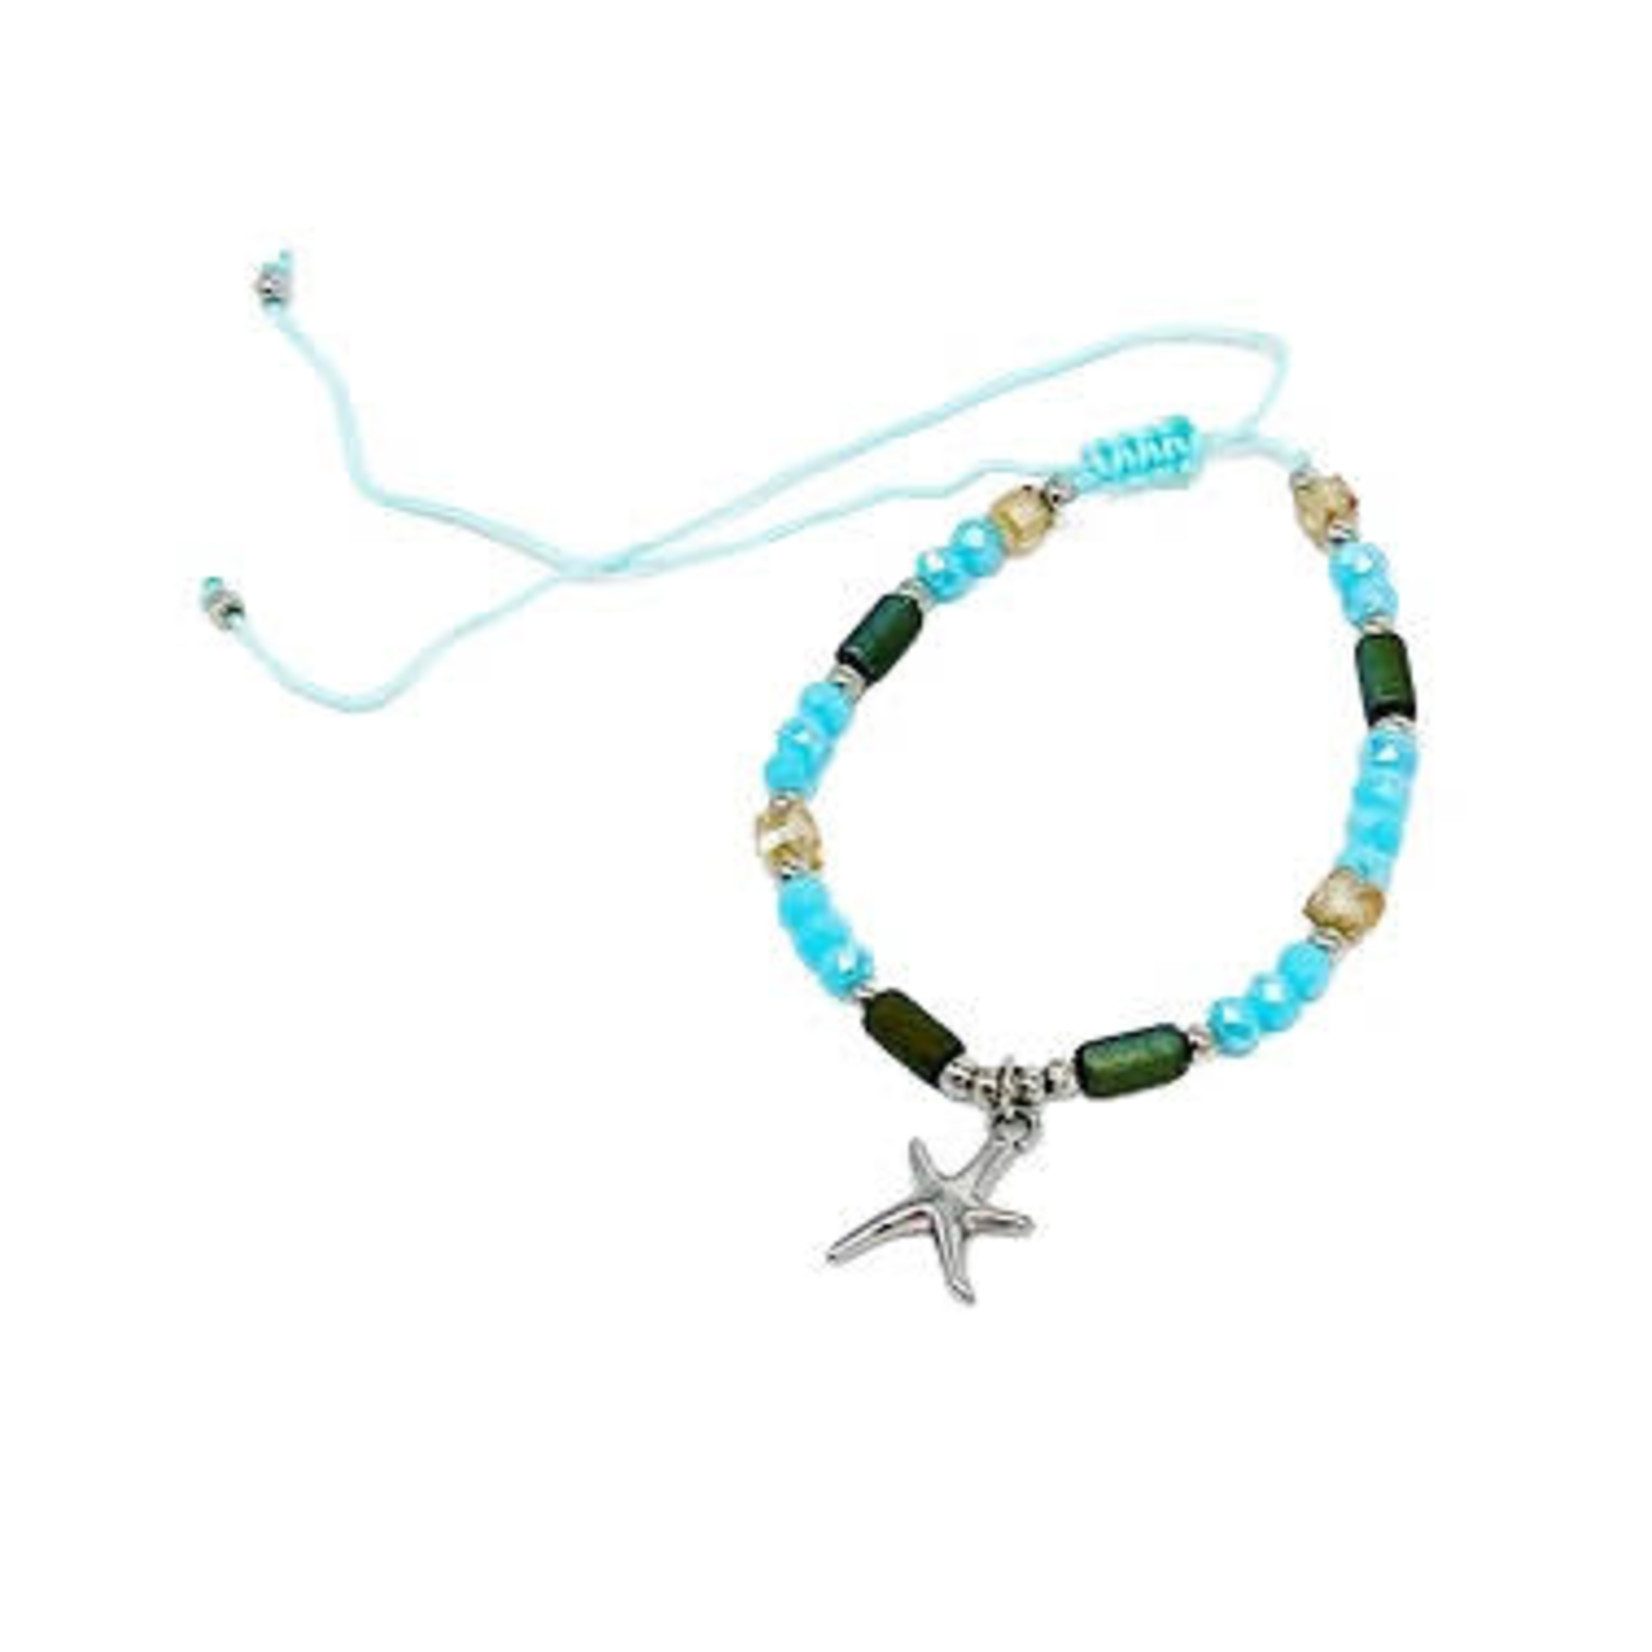 Adjustable Beaded Anklet with Charm Blue Starfish